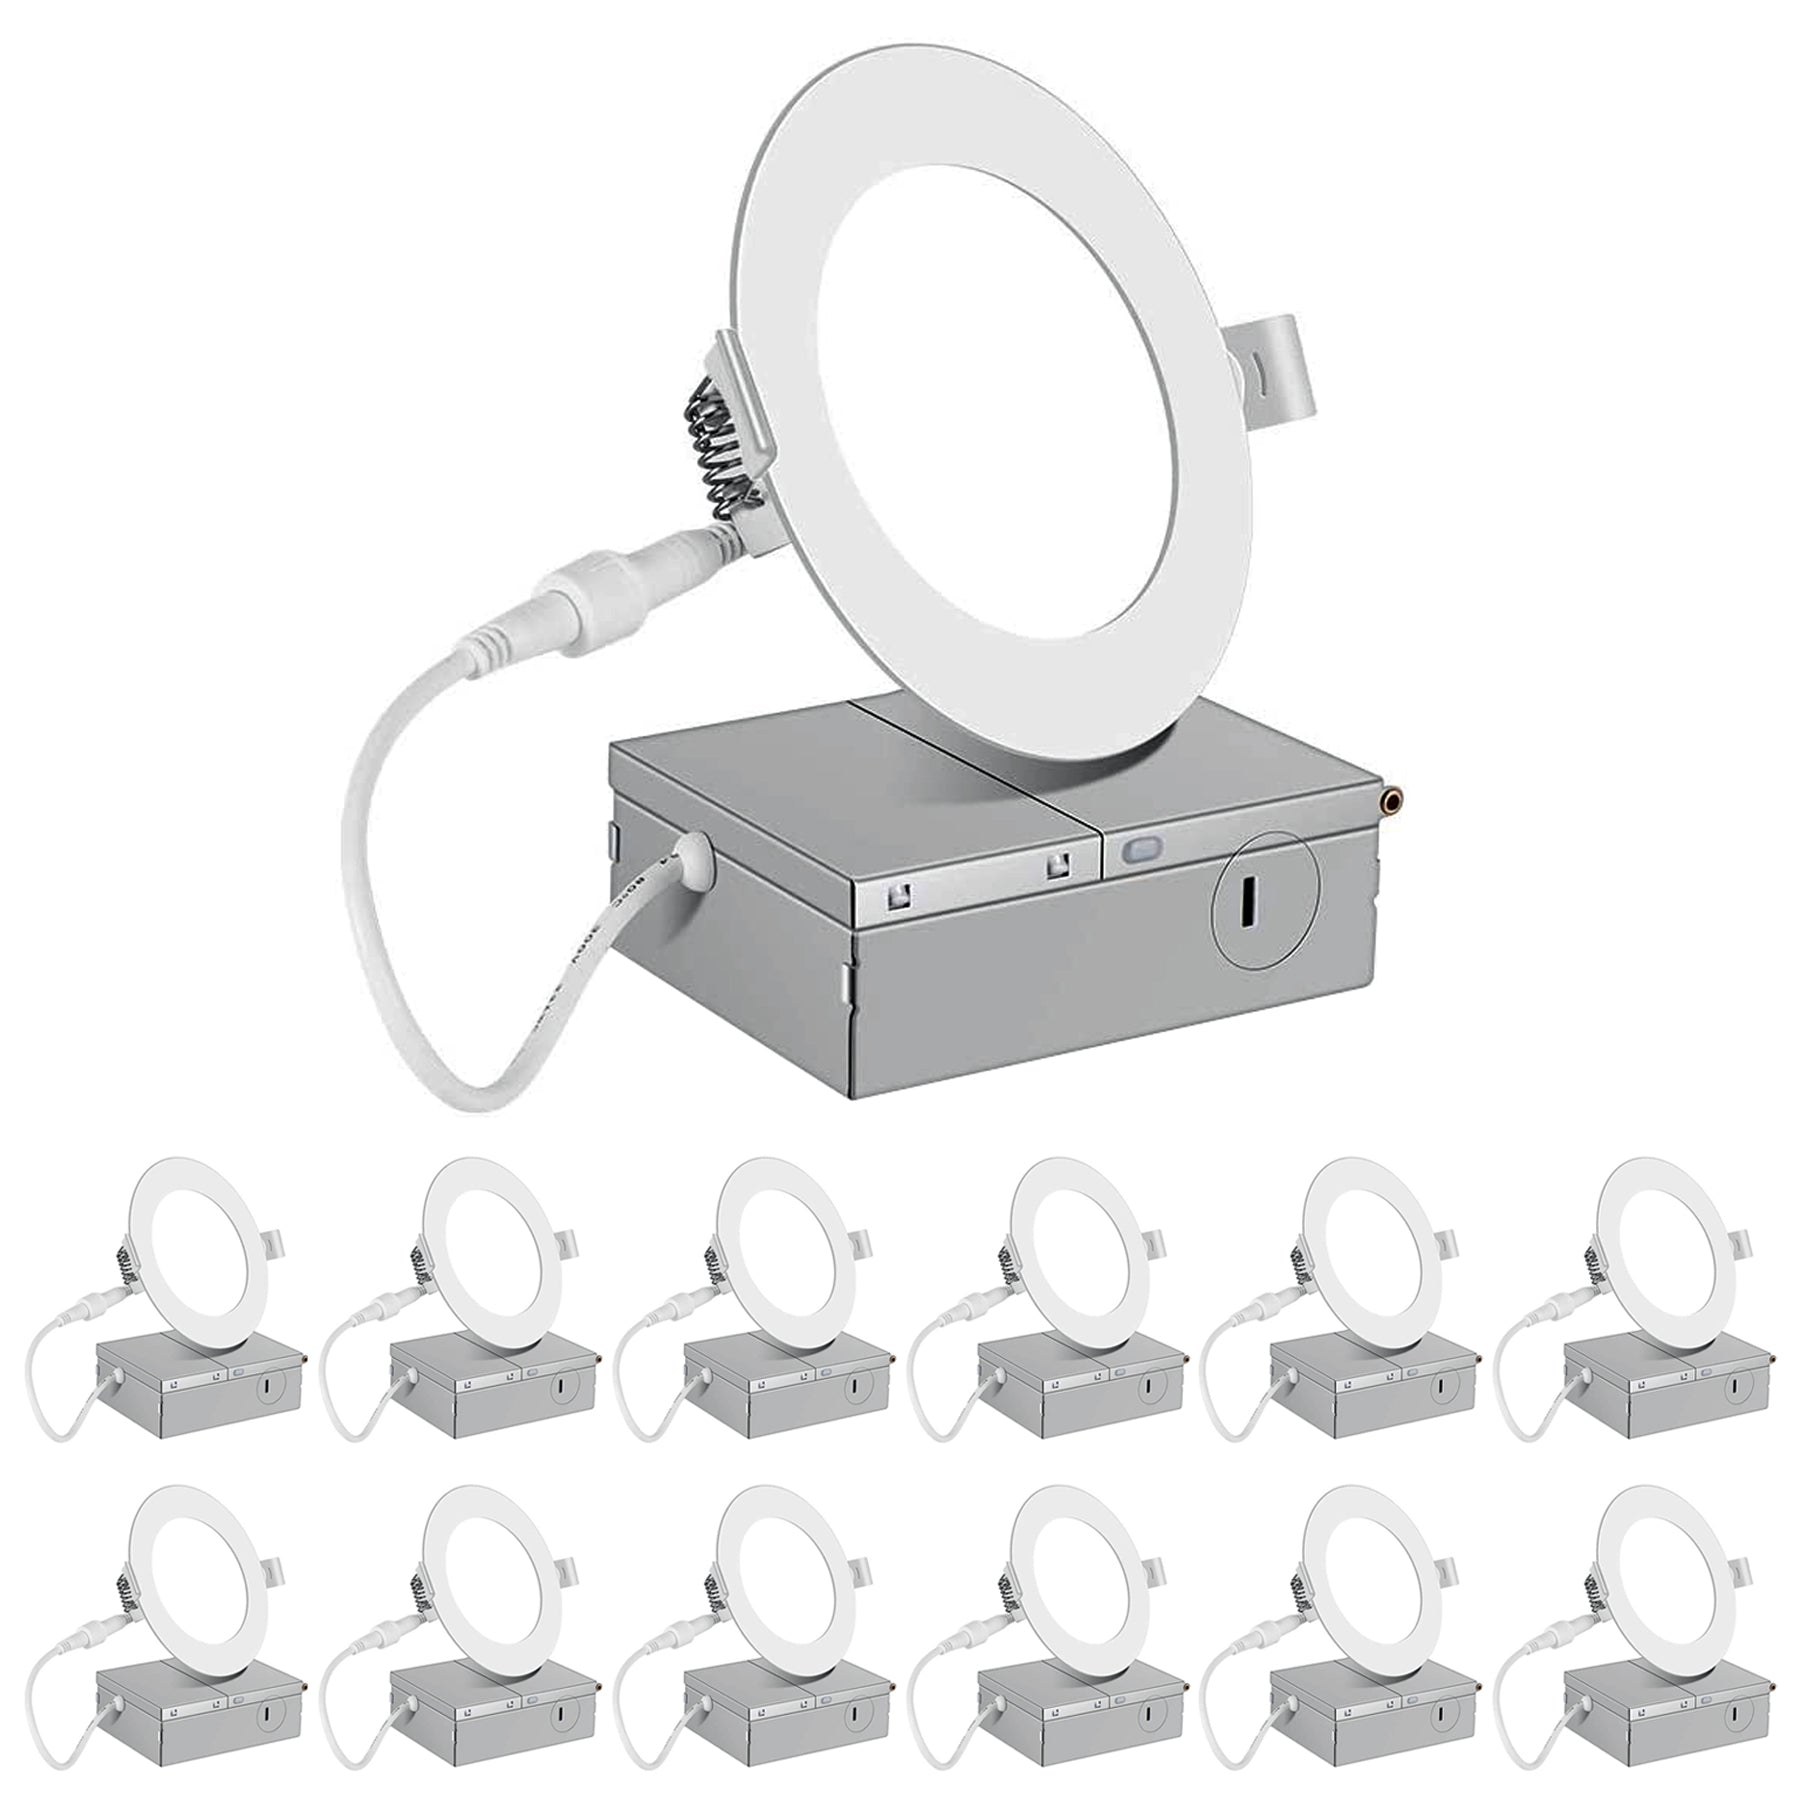 4 Inch 12 Pack (9 Watt 700 Lumens), LED Ceiling Lights with Junction Box